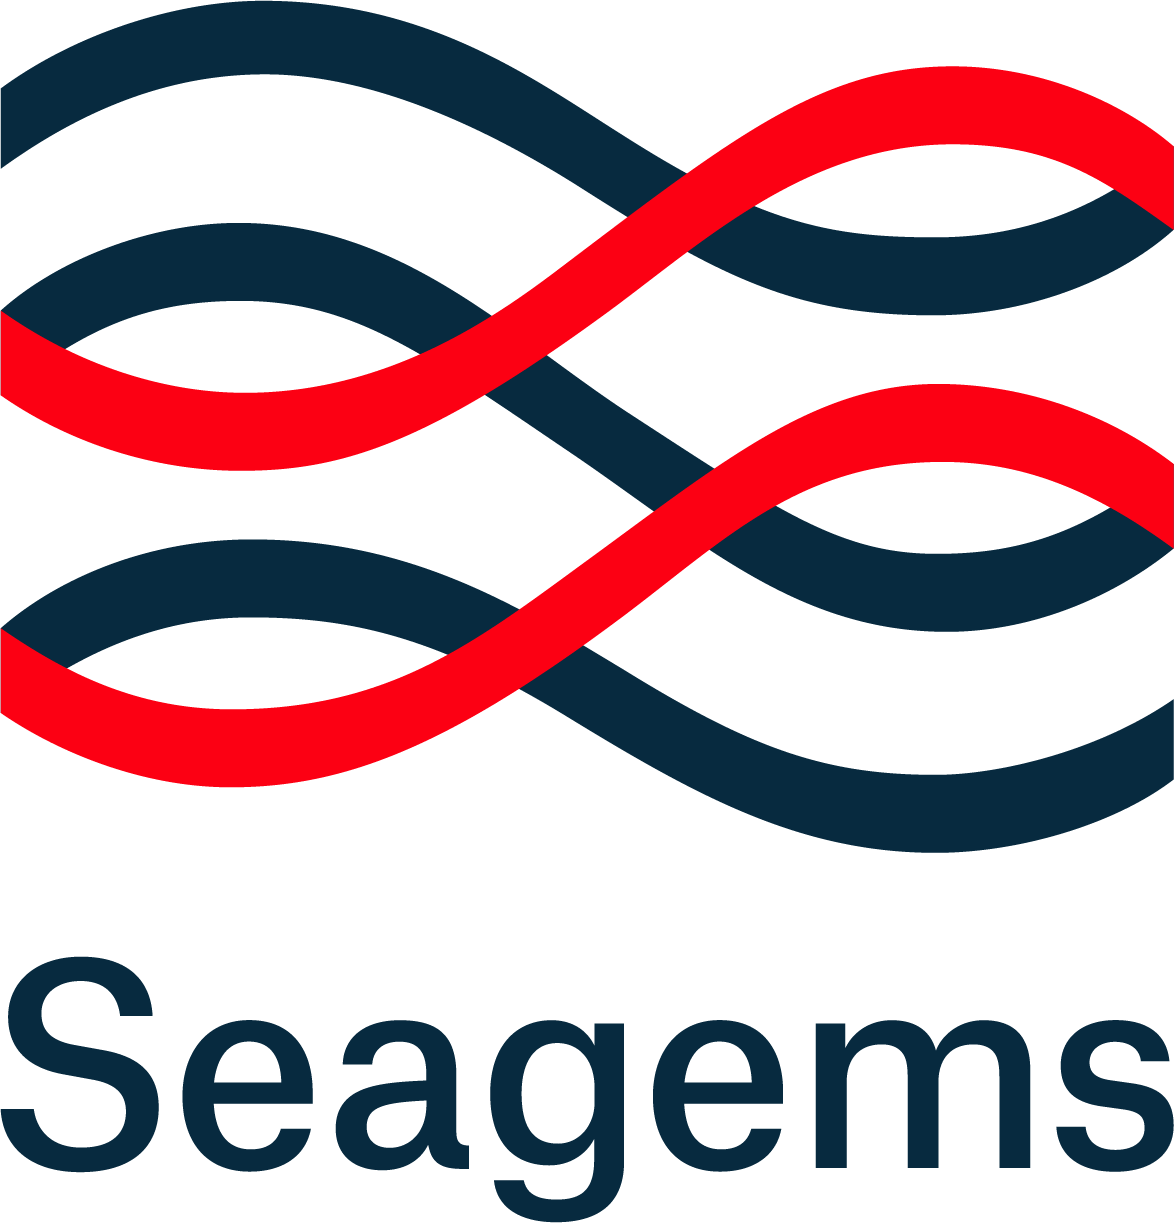 Seagems Norway AS